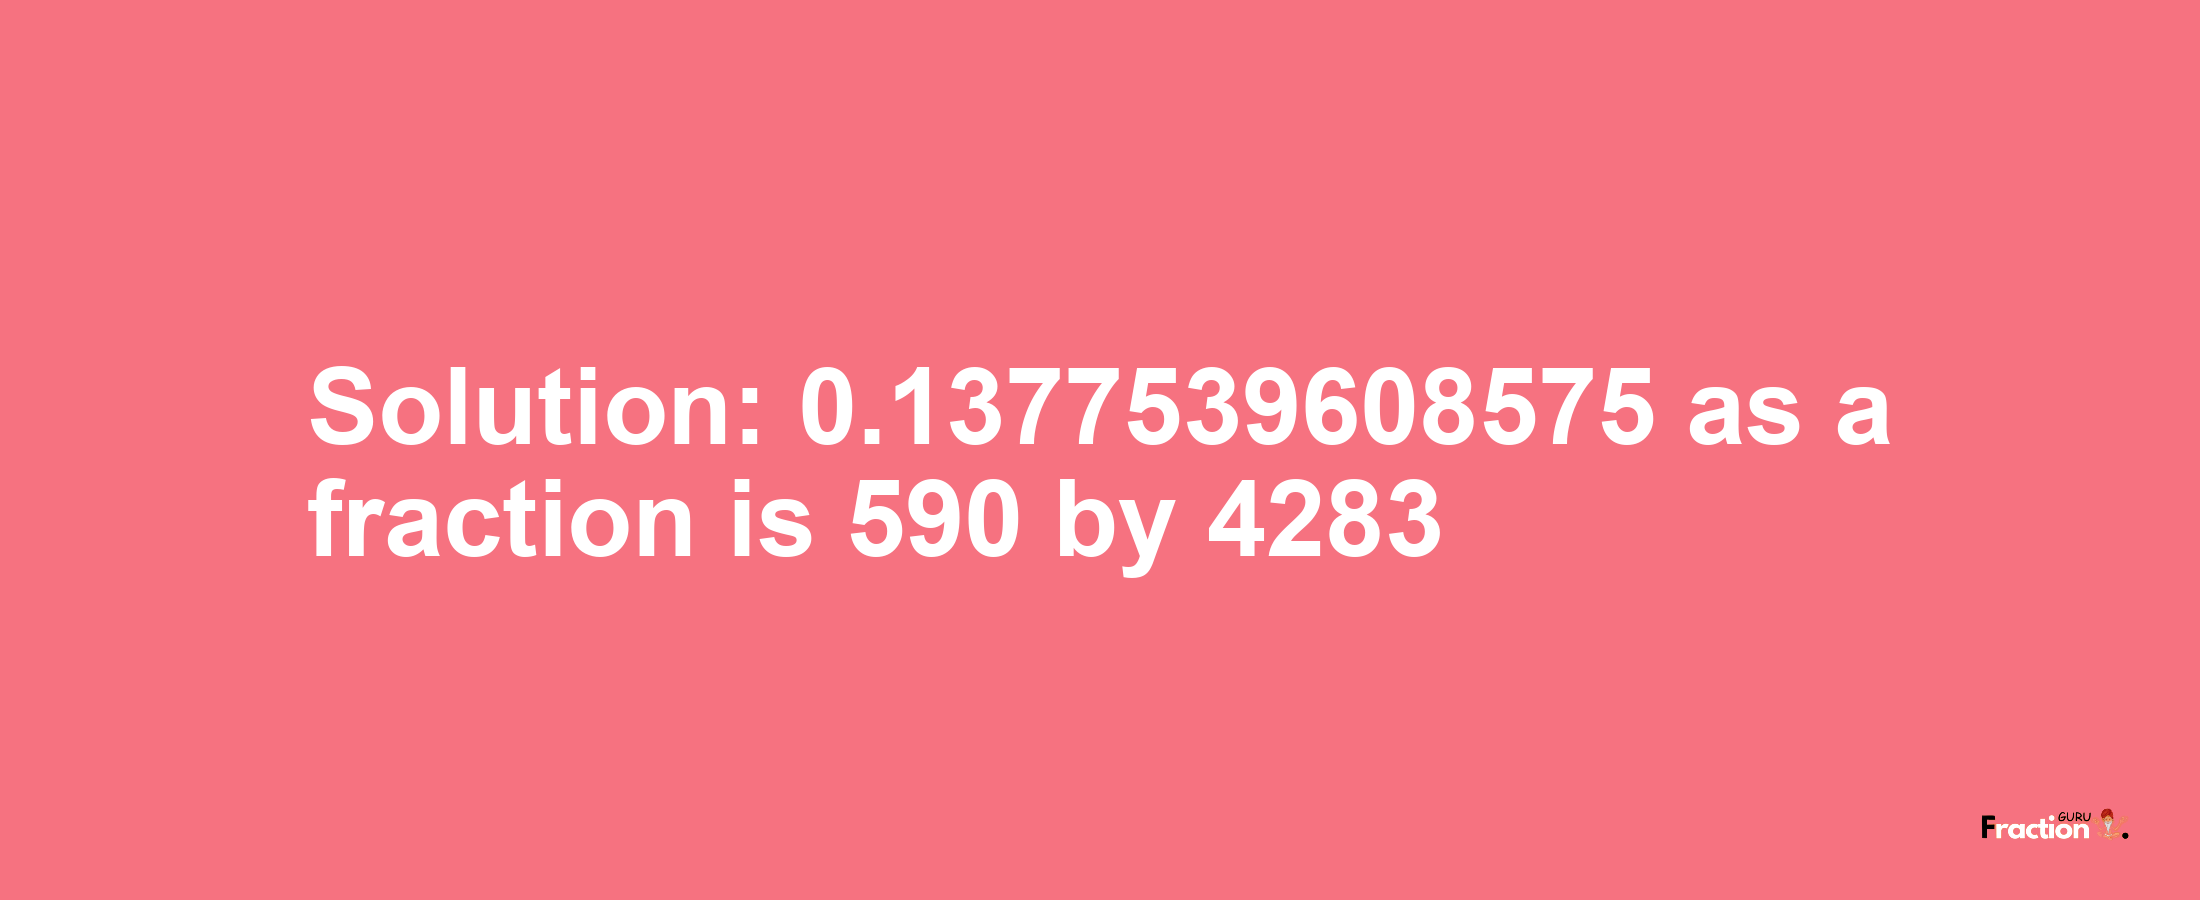 Solution:0.1377539608575 as a fraction is 590/4283